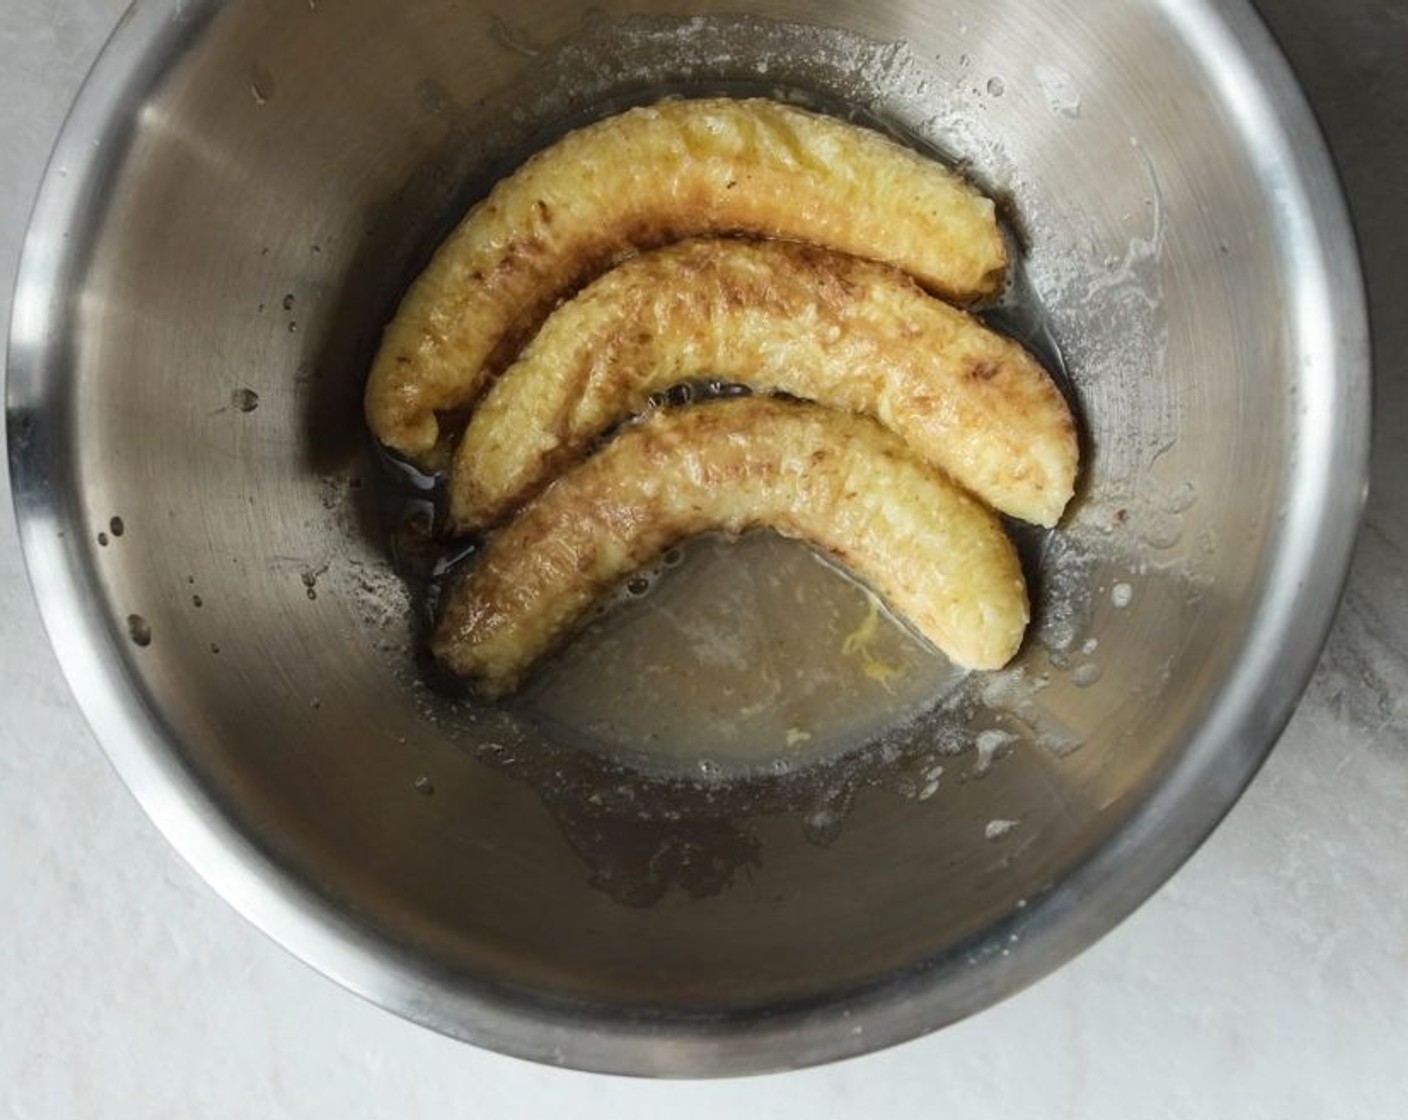 step 7 Once the banana has cooled, mash it up and add it to the wet ingredients. Squeeze all the liquid out from the banana skins and mix it into the wet ingredients as well, this will be the naturally sweetened banana extract!